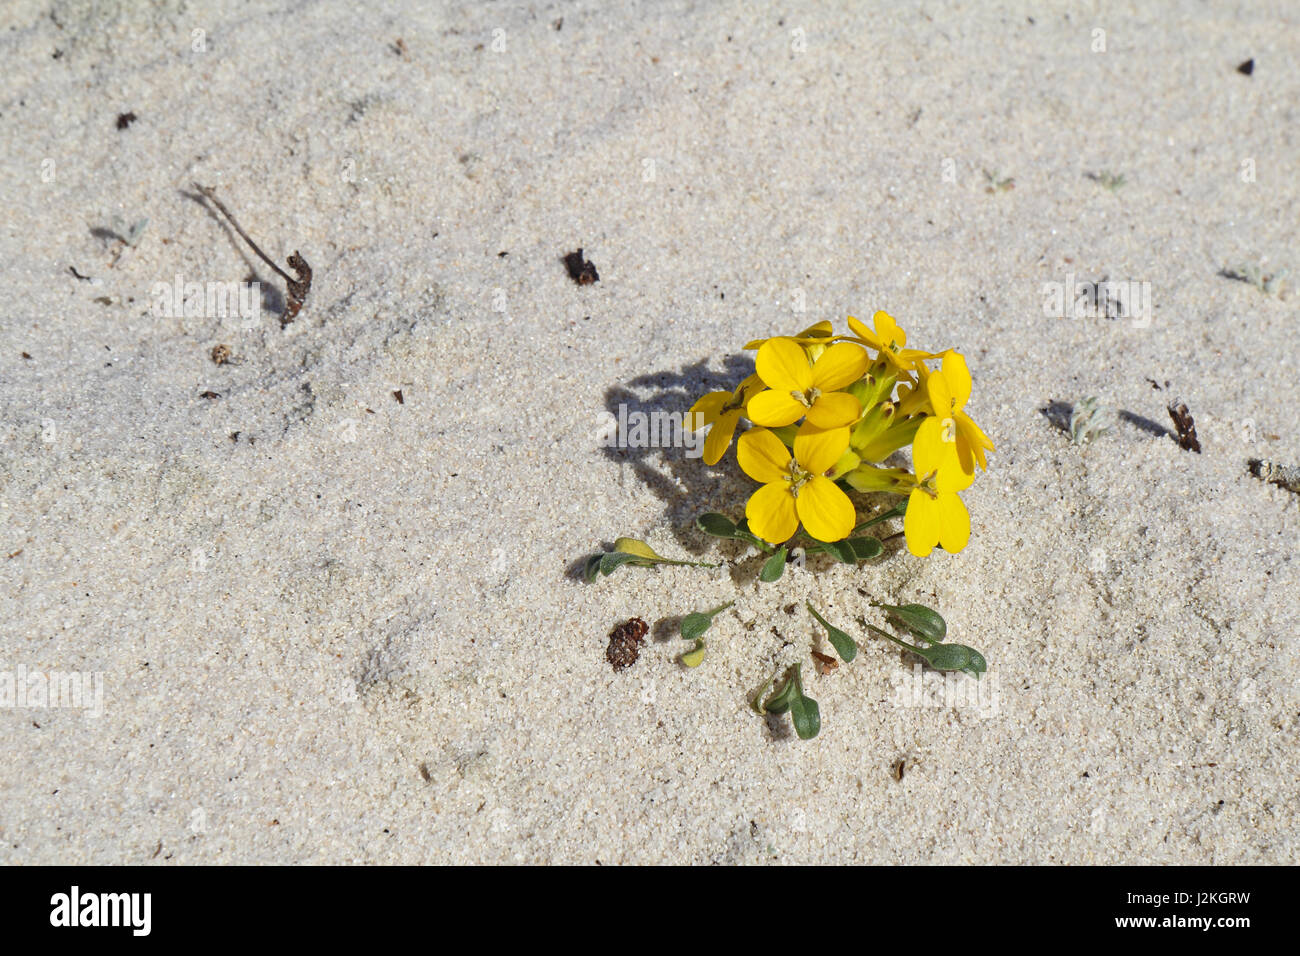 Menzie's wallflower (Erysimum menziesii), one of the rarest plants in the world, growsin pure sand at Asilomar Dunes Natural Preserve in Pacific Grove Stock Photo